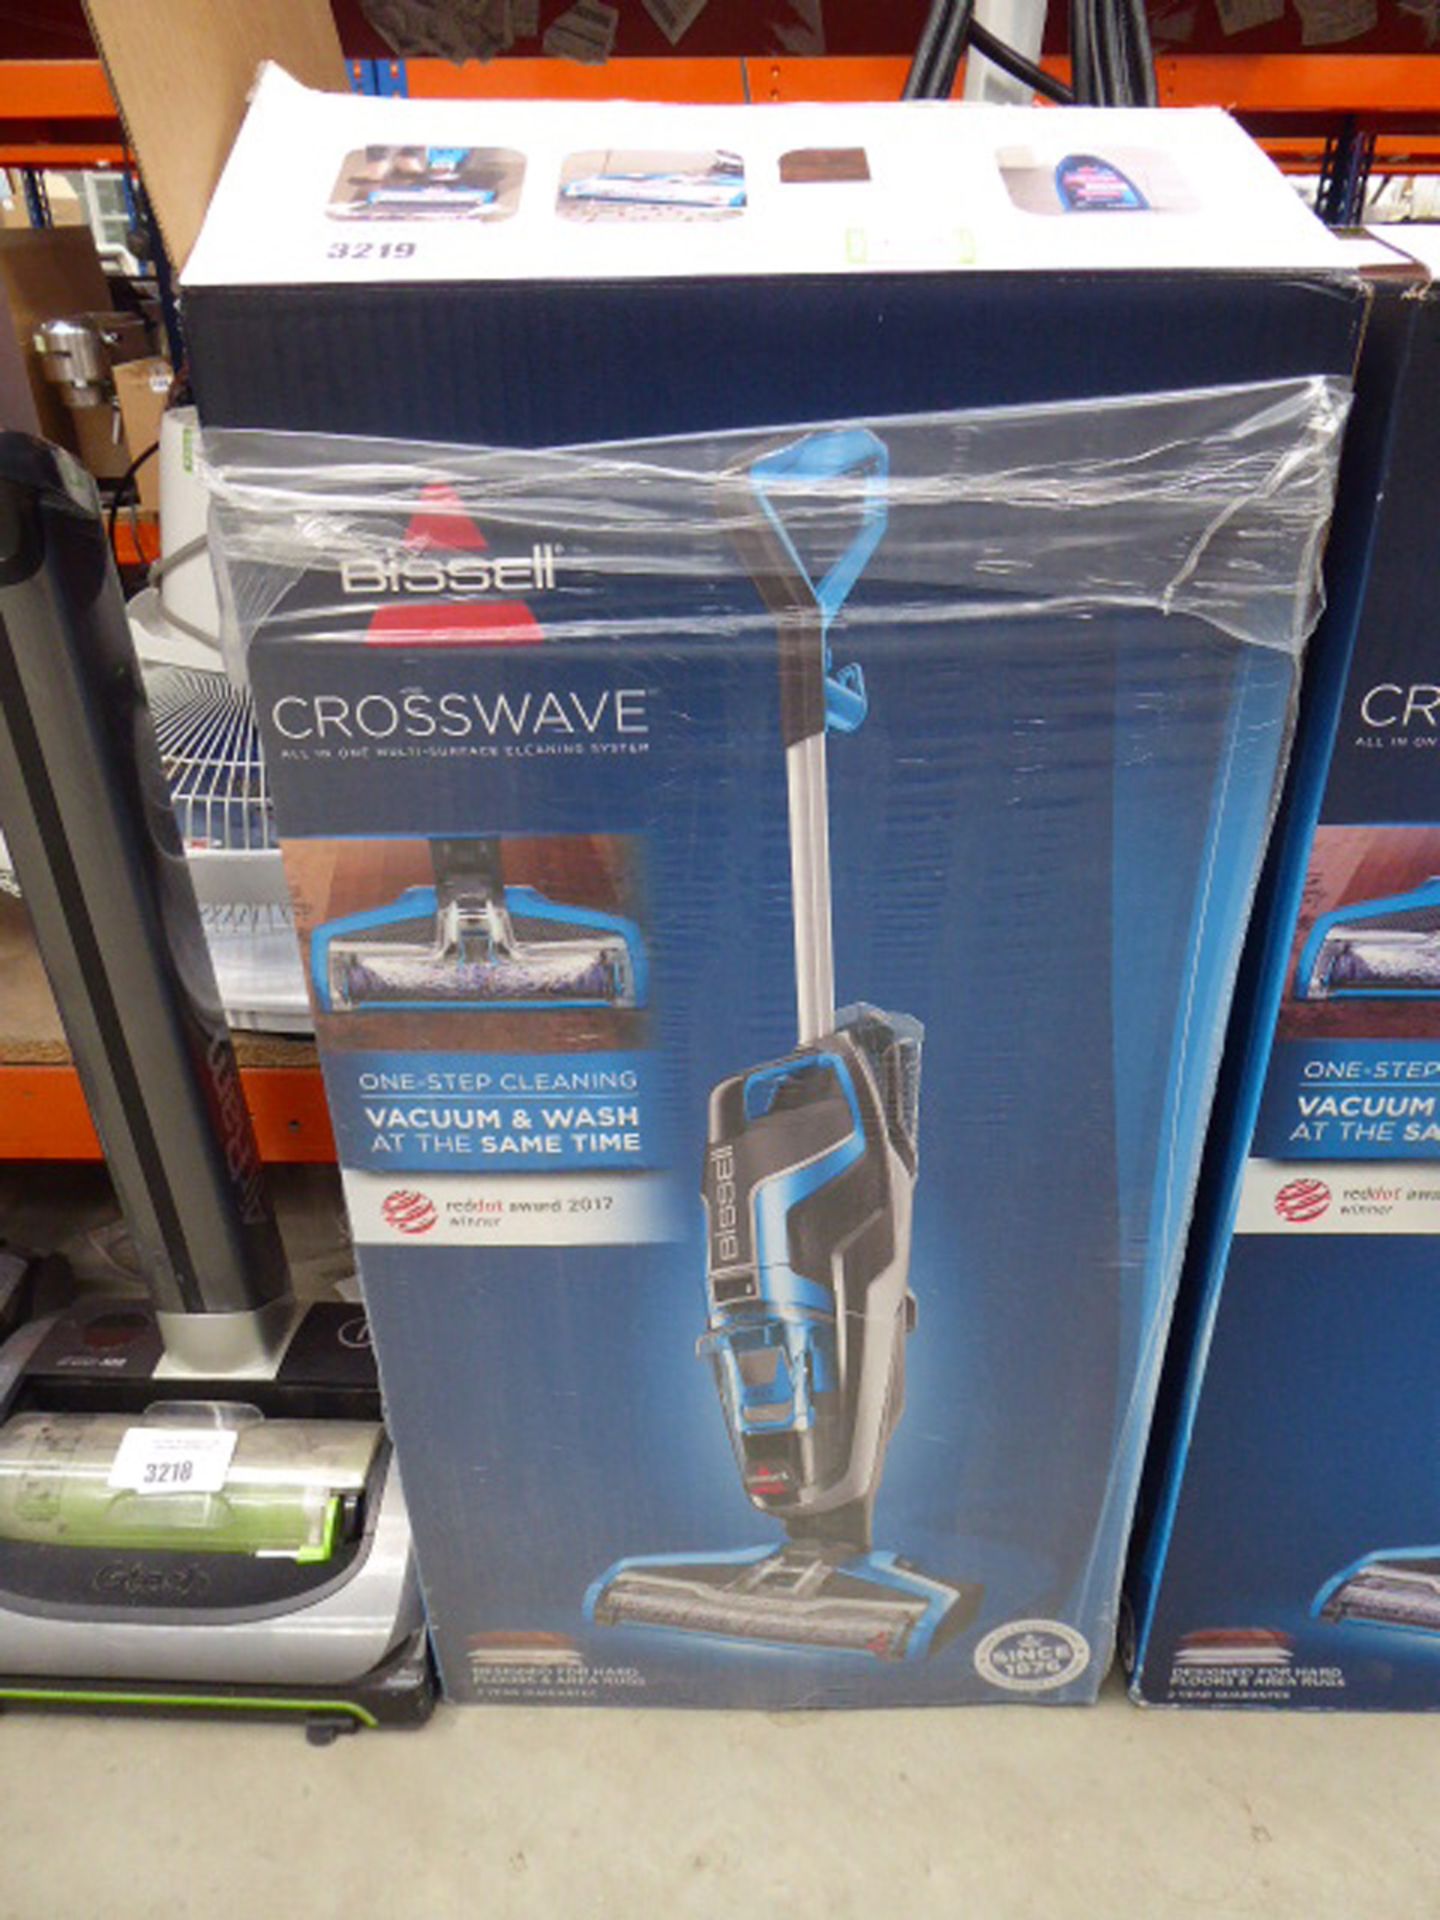 131 Bissell crosswave all in one multi surface cleaning system with box